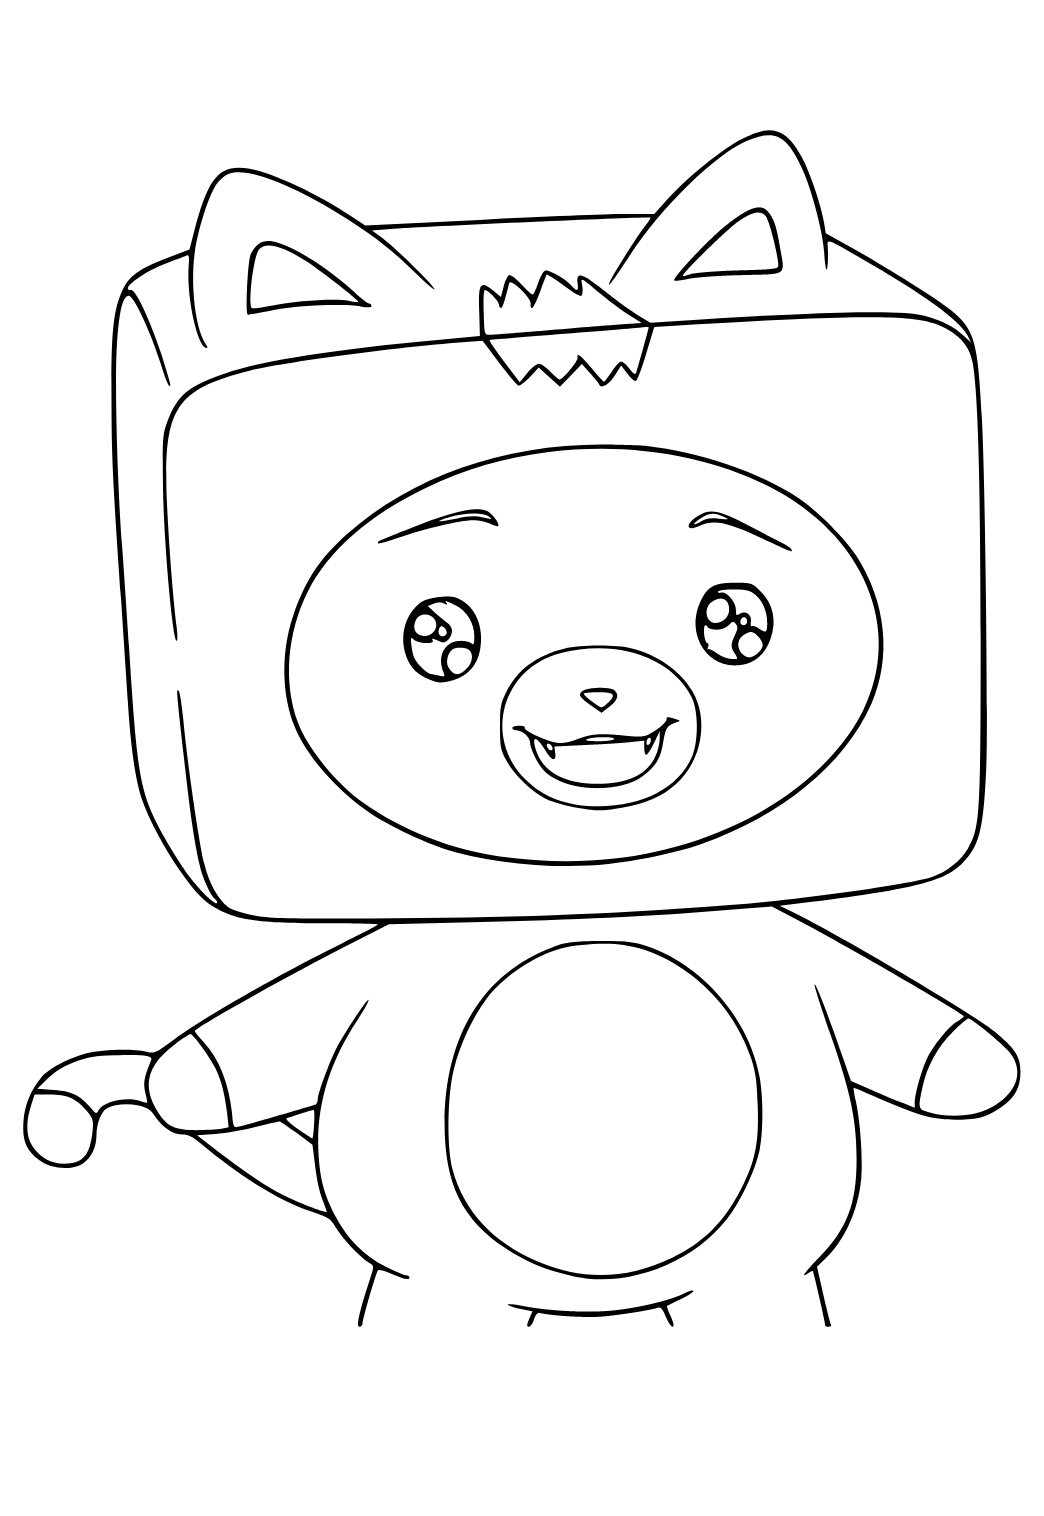 free-printable-lankybox-smile-coloring-page-for-adults-and-kids